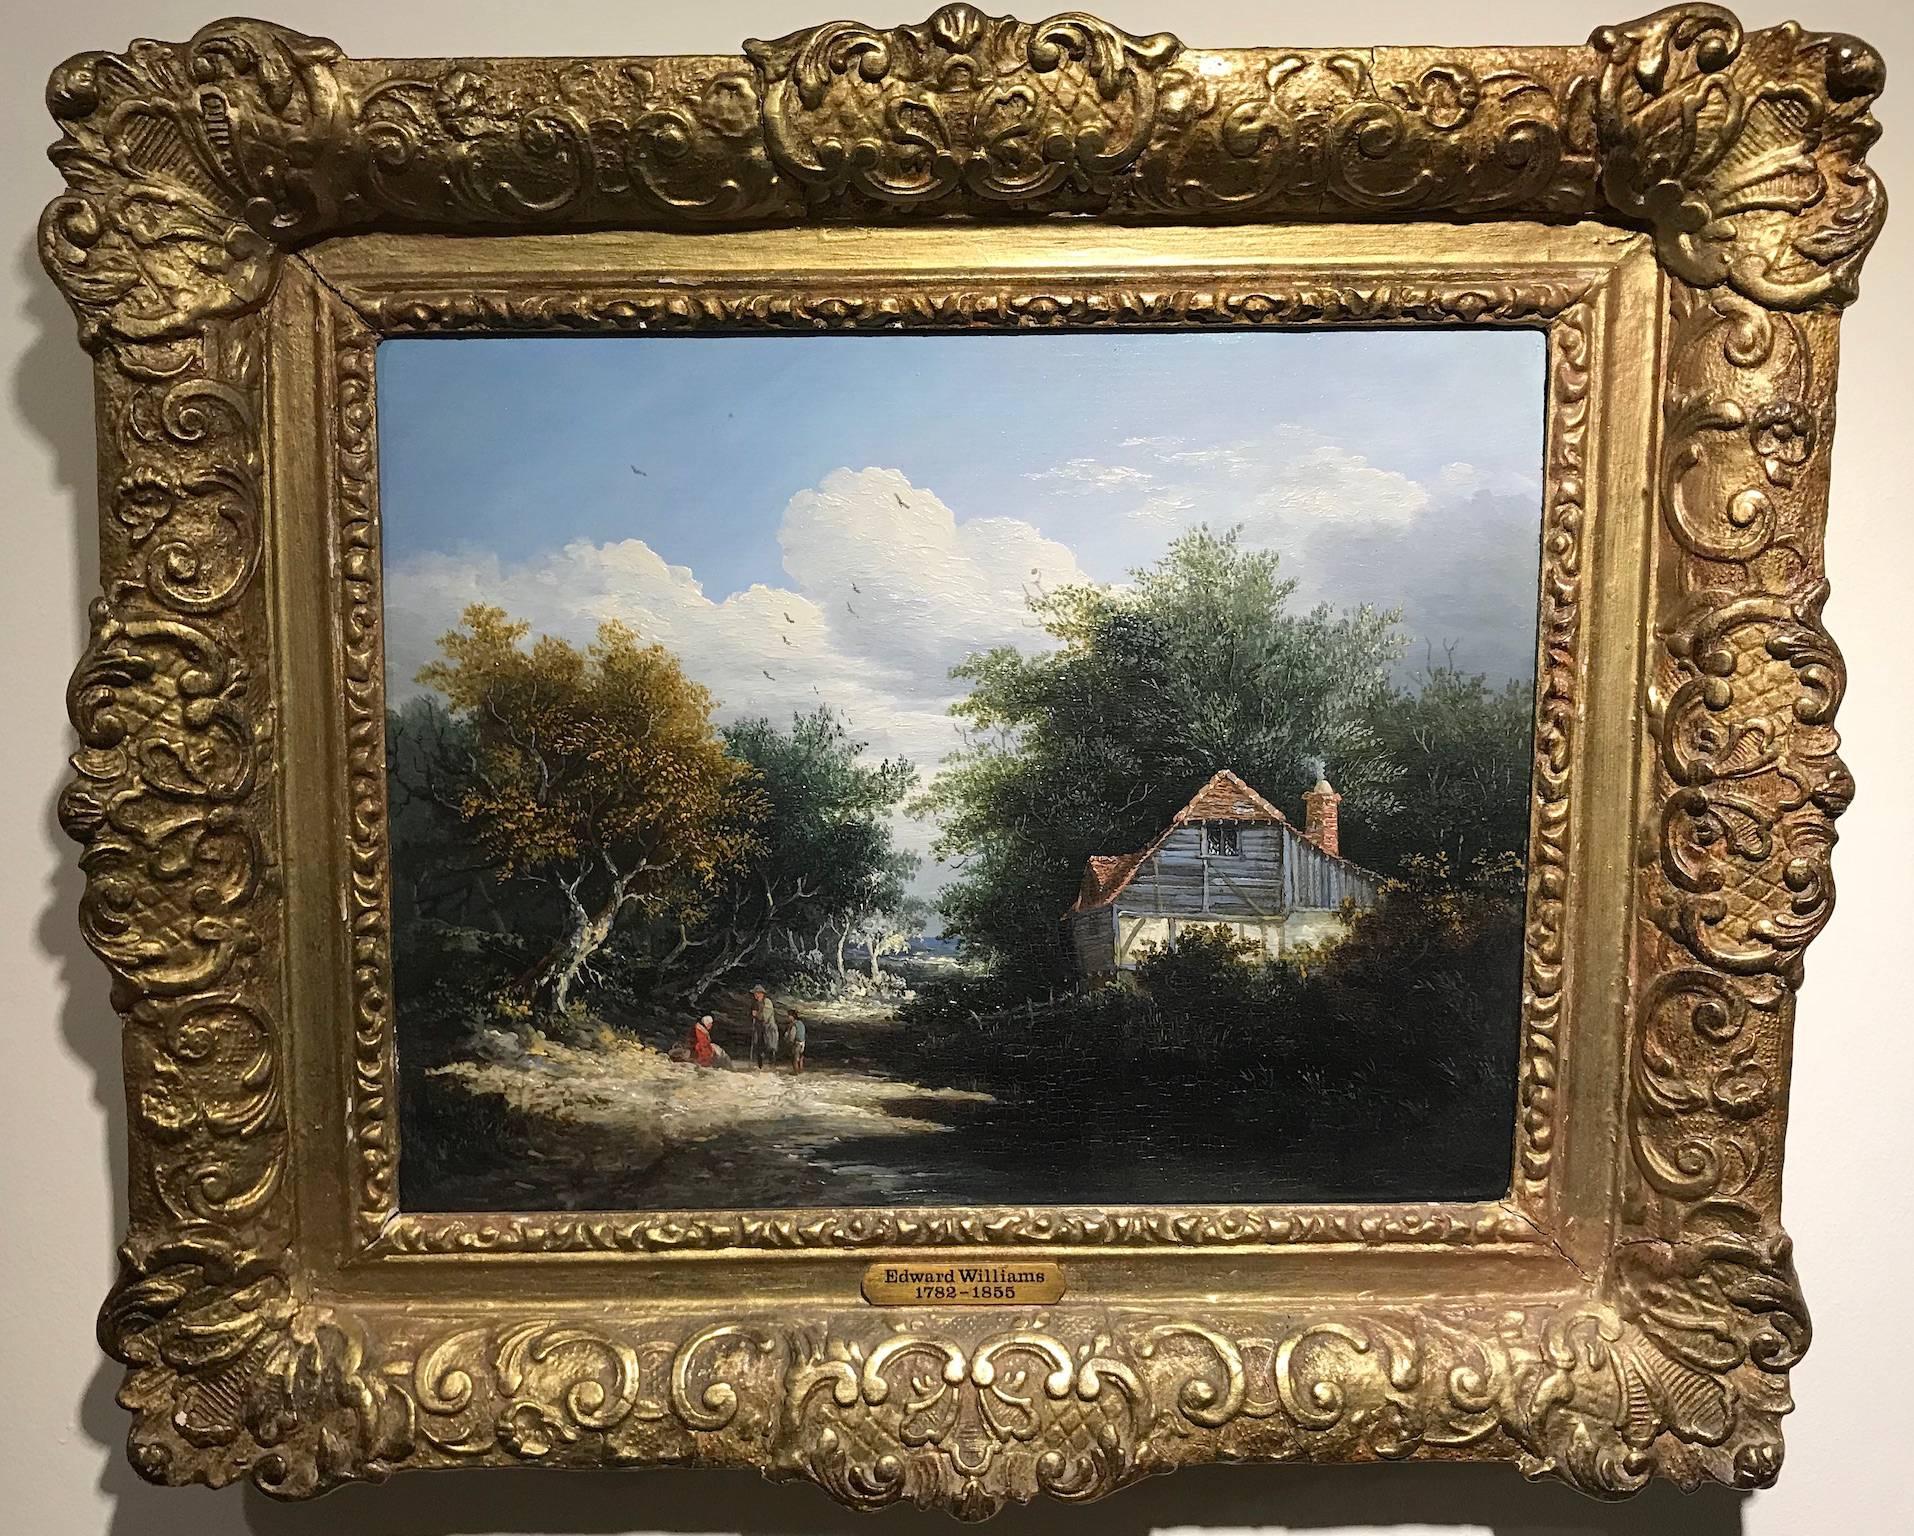 Edward Williams  (1782-1855) 
A Pair of English Landscapes  
Oil on Canvas.
Total overall size including painting and frame: 38cm x 44cm x 4cm

Edward Williams was an English landscape painter.  One of six sons, who were well-known landscape